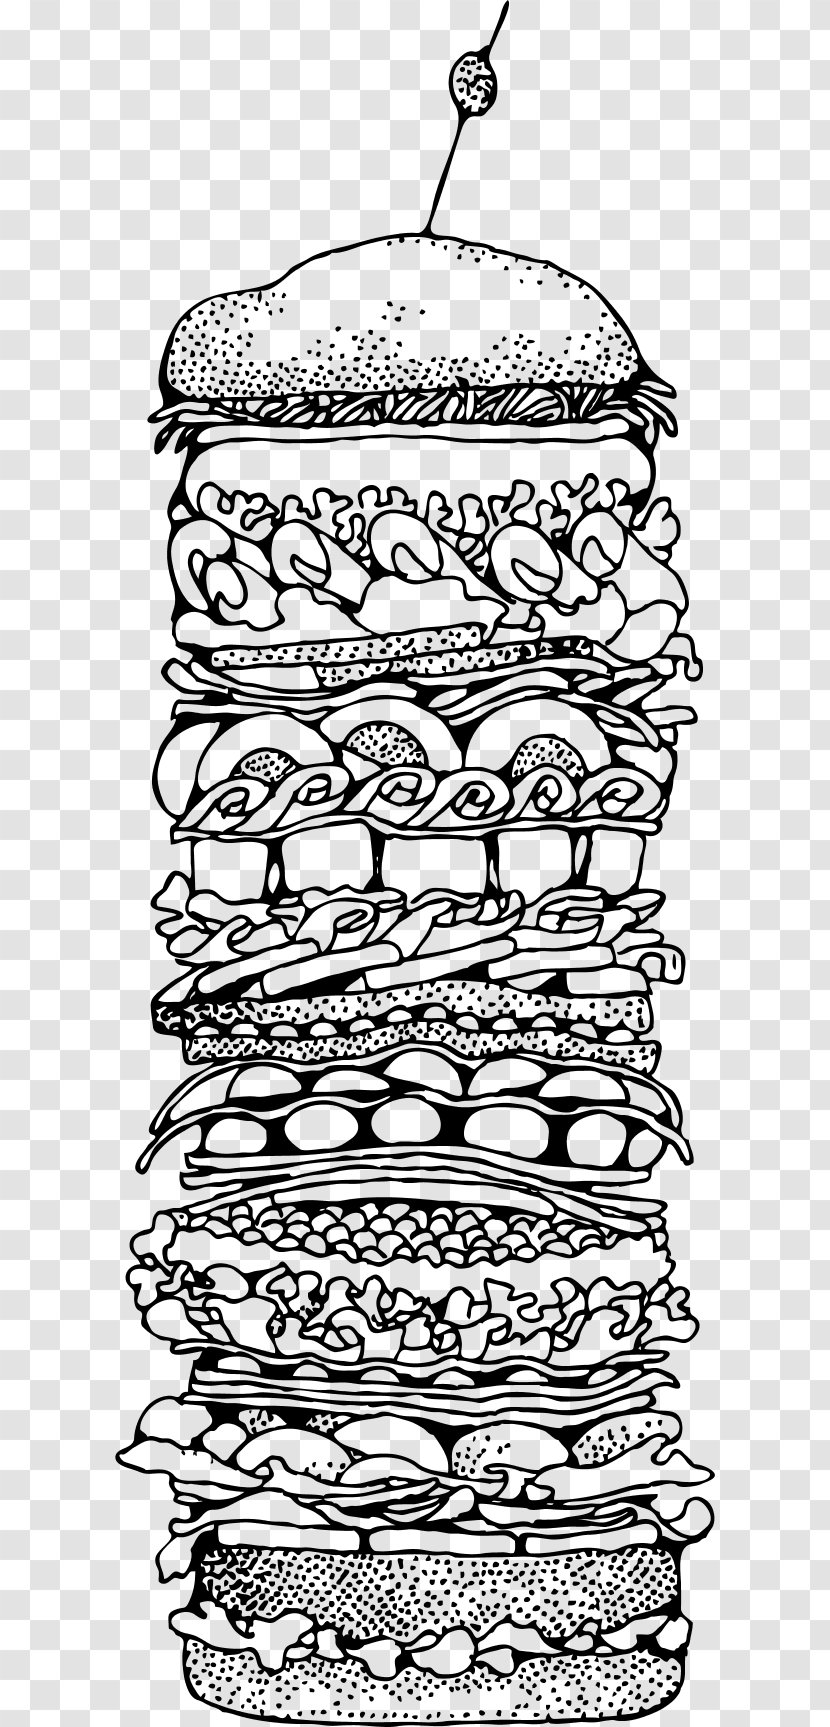 Peanut Butter And Jelly Sandwich Submarine Hamburger French Fries Fast Food - Line Art - Denver Transparent PNG